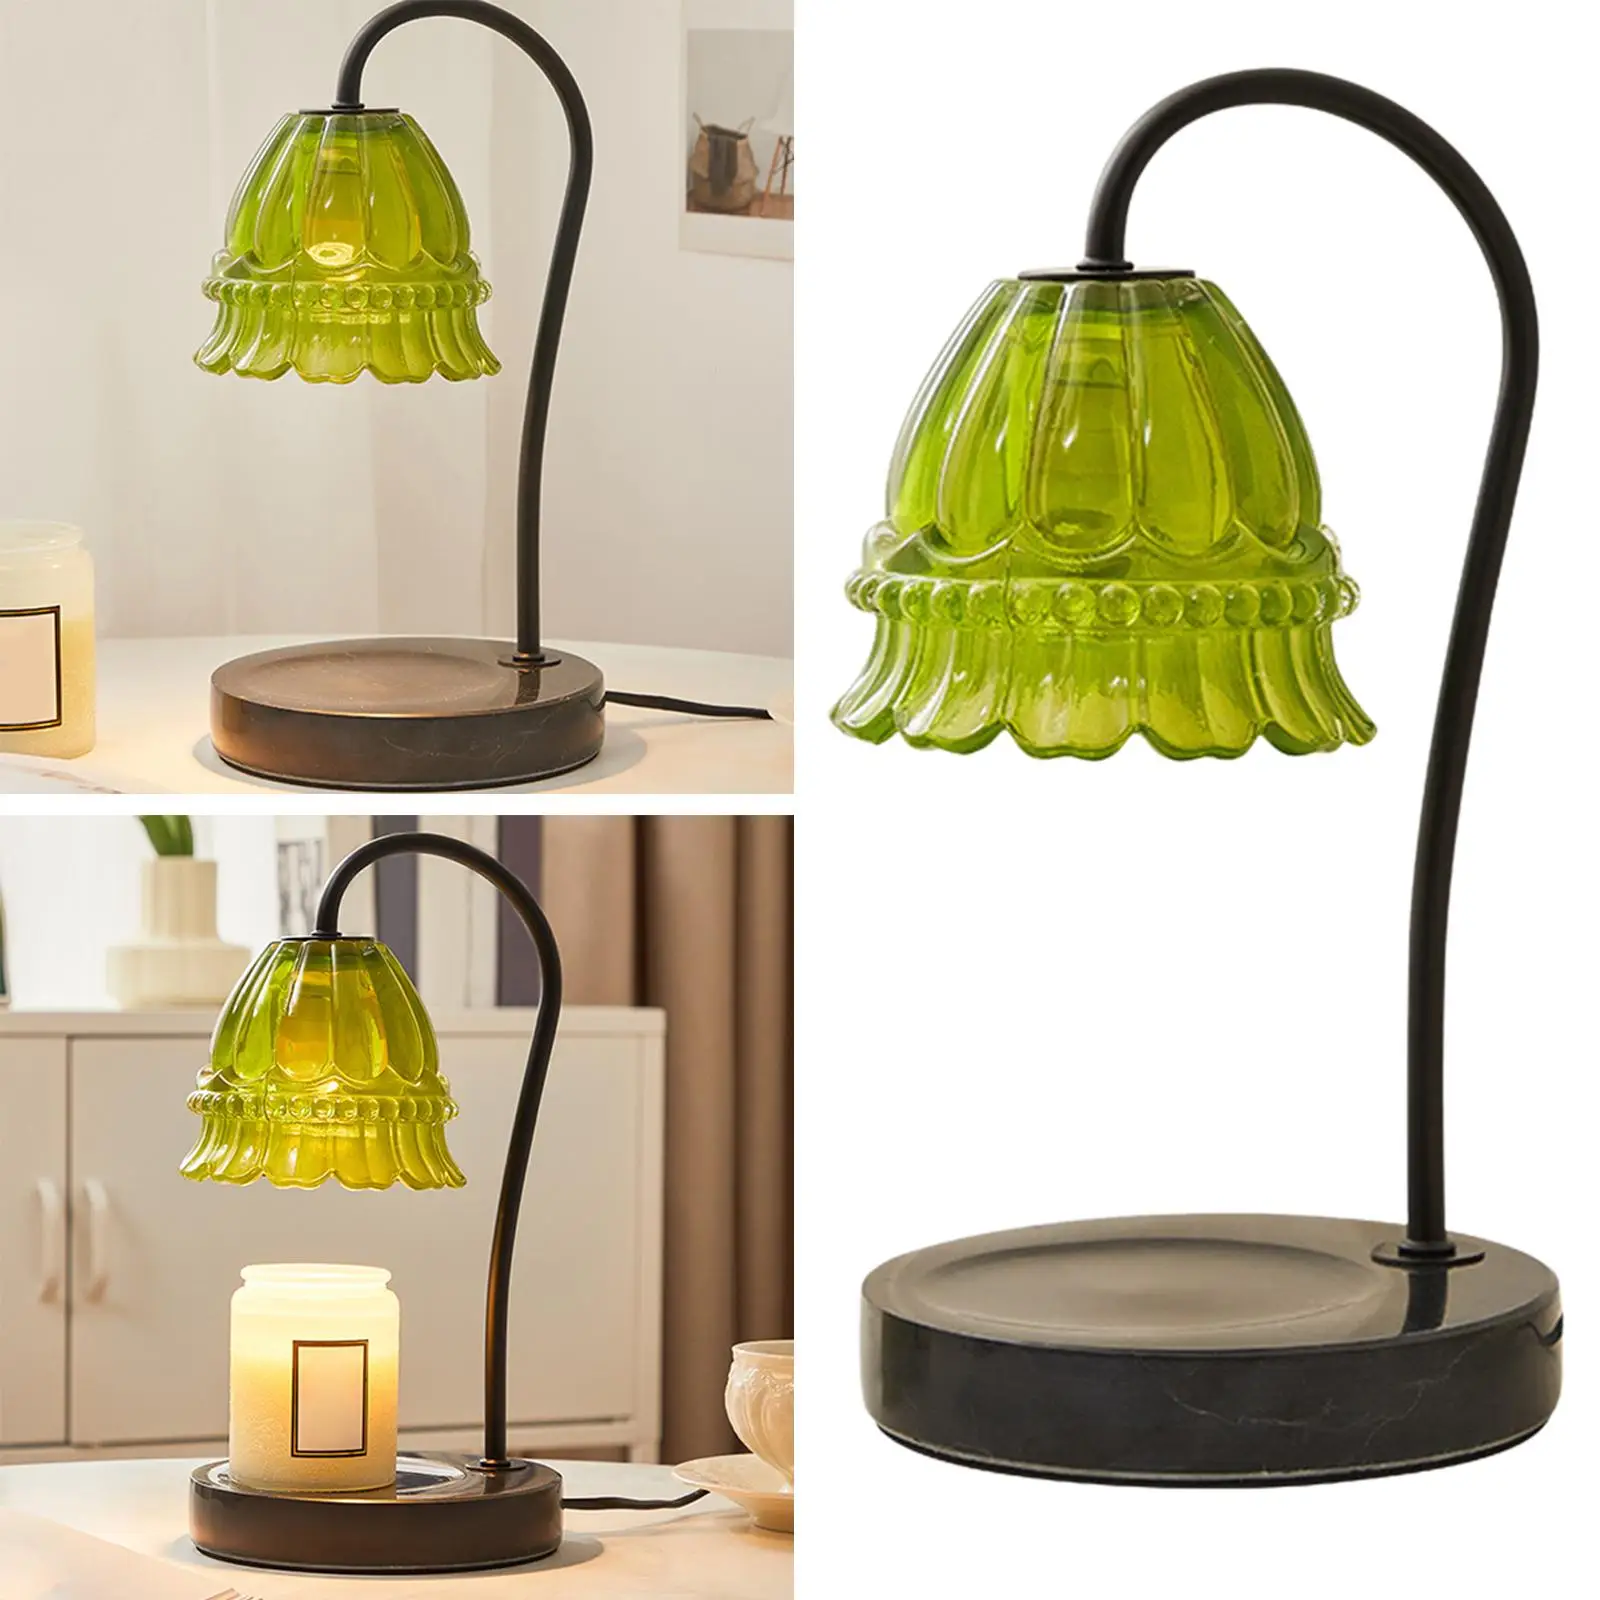 European Style Candle Warmer Lamp  Melting Heater for Bathroom Study Room